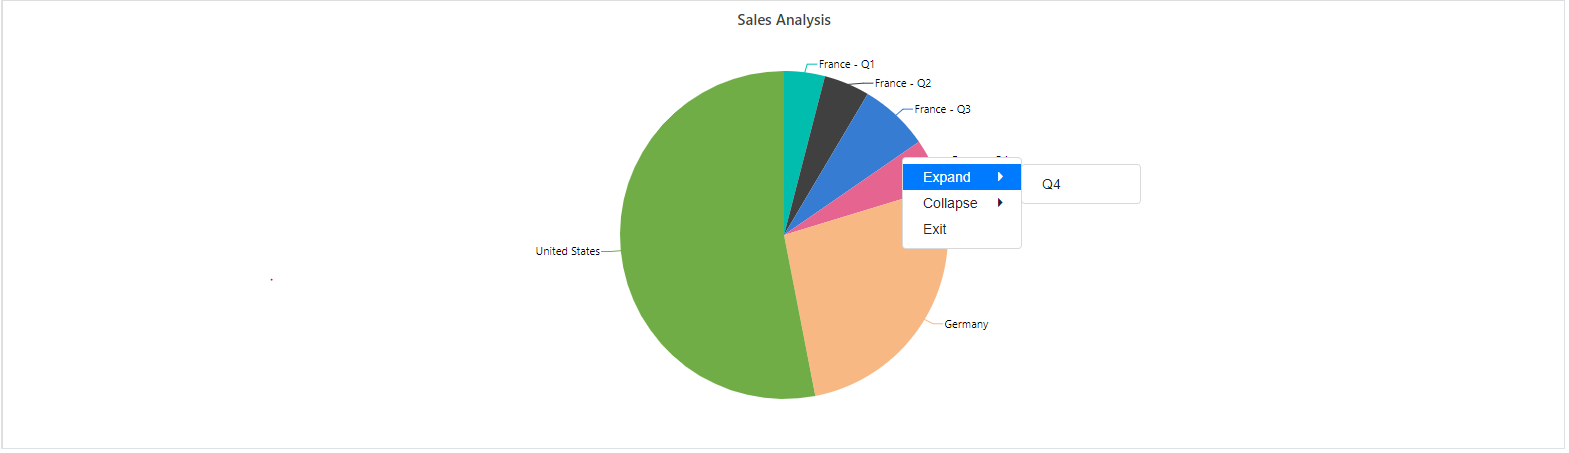 Blazor Pie Chart with Drill Down and Up